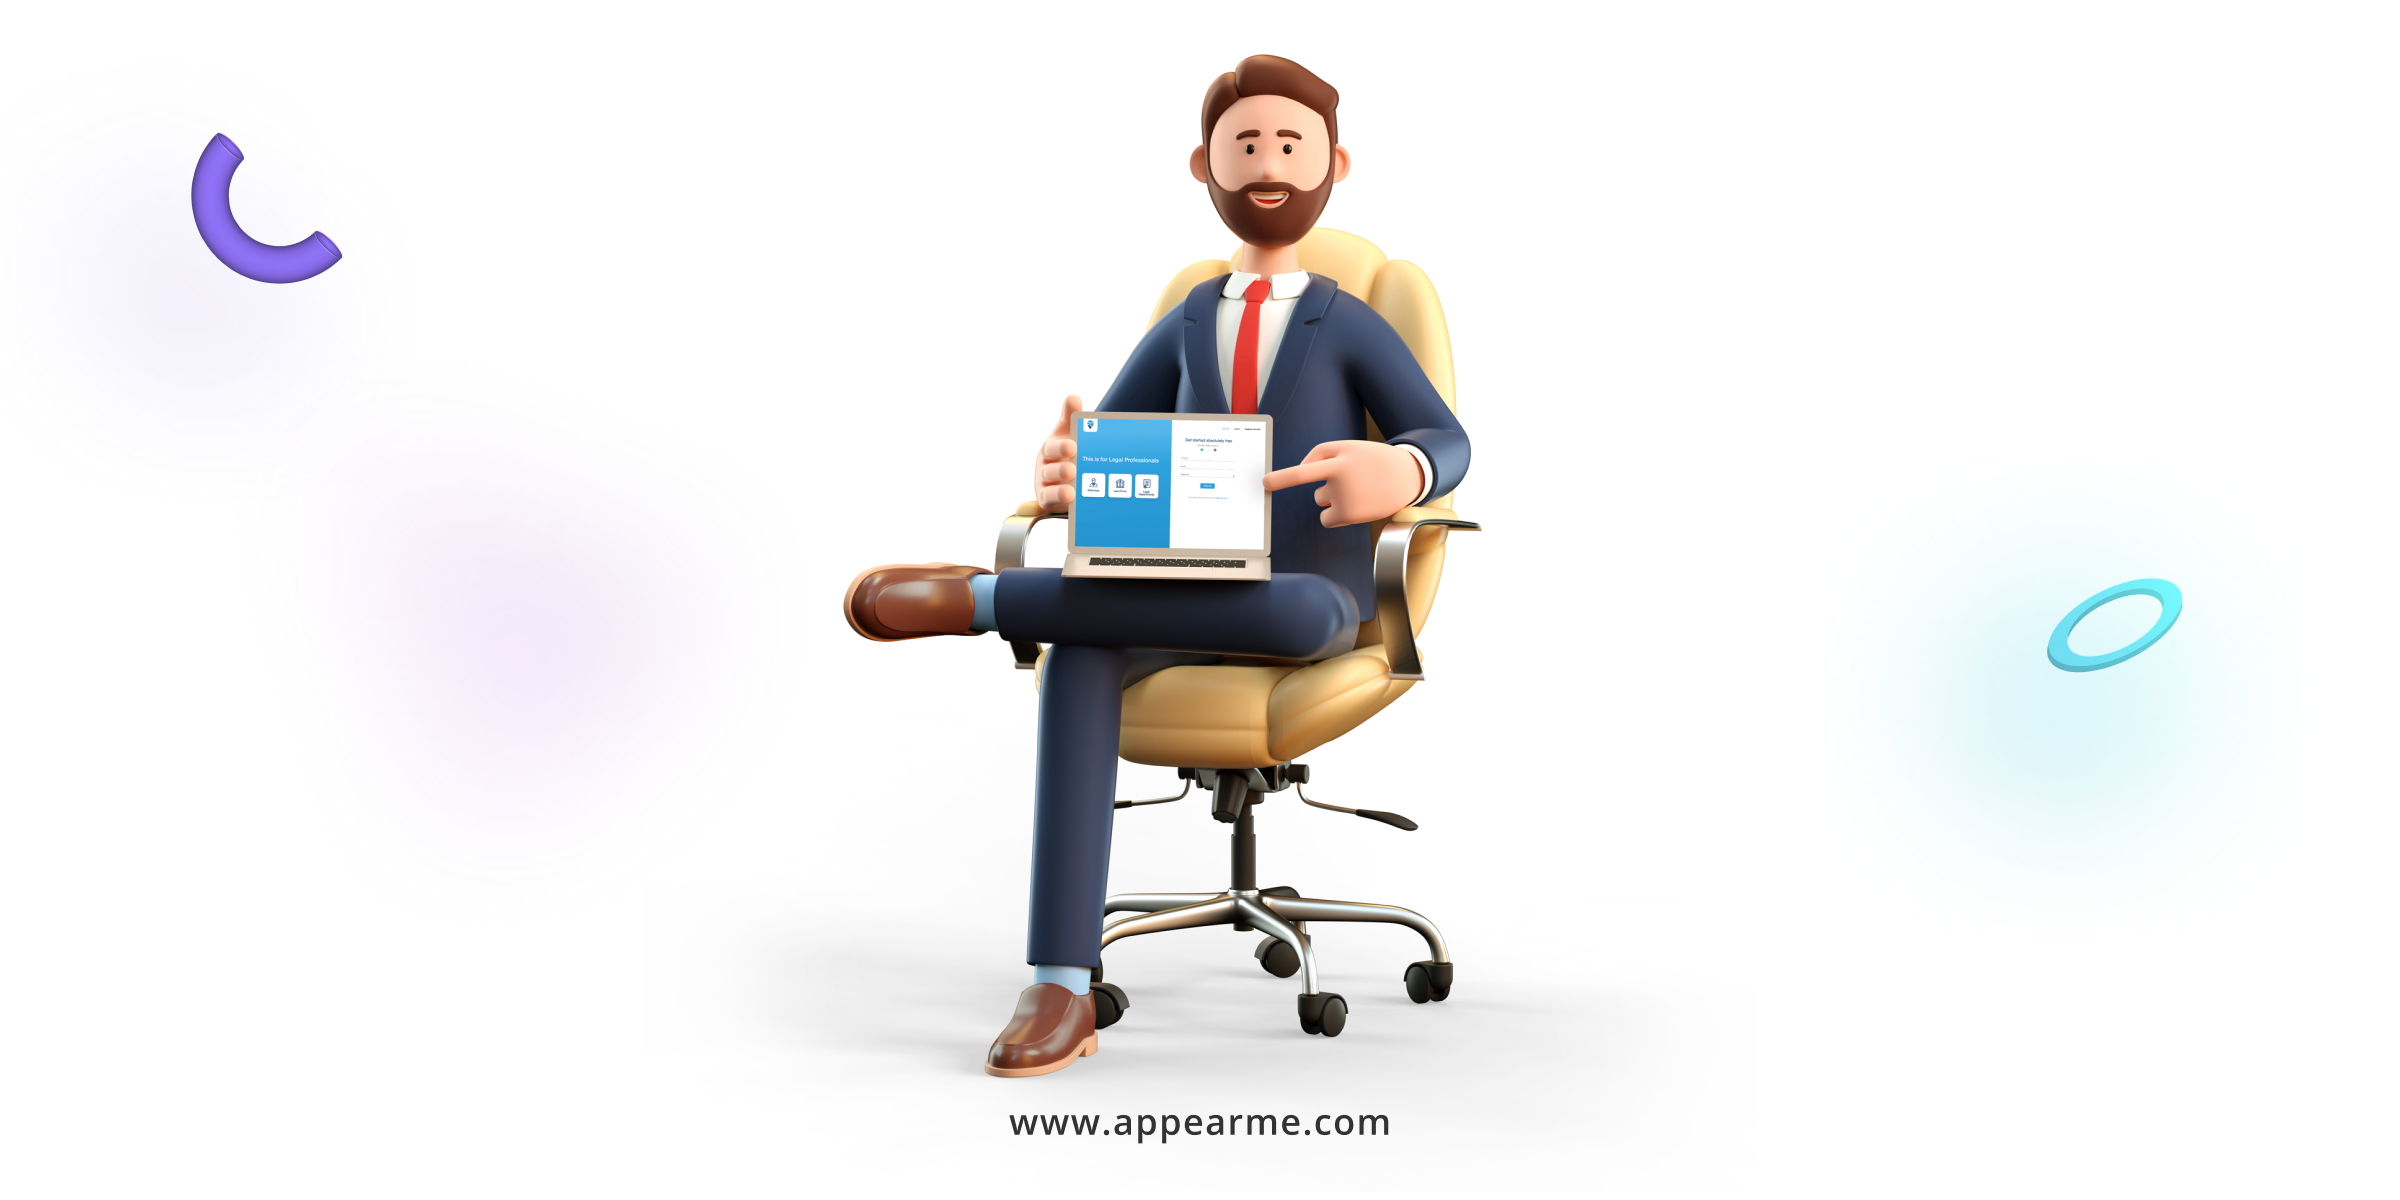 AppearMe: More Efficiency and Unlimited Opportunities for Freelance Attorneys